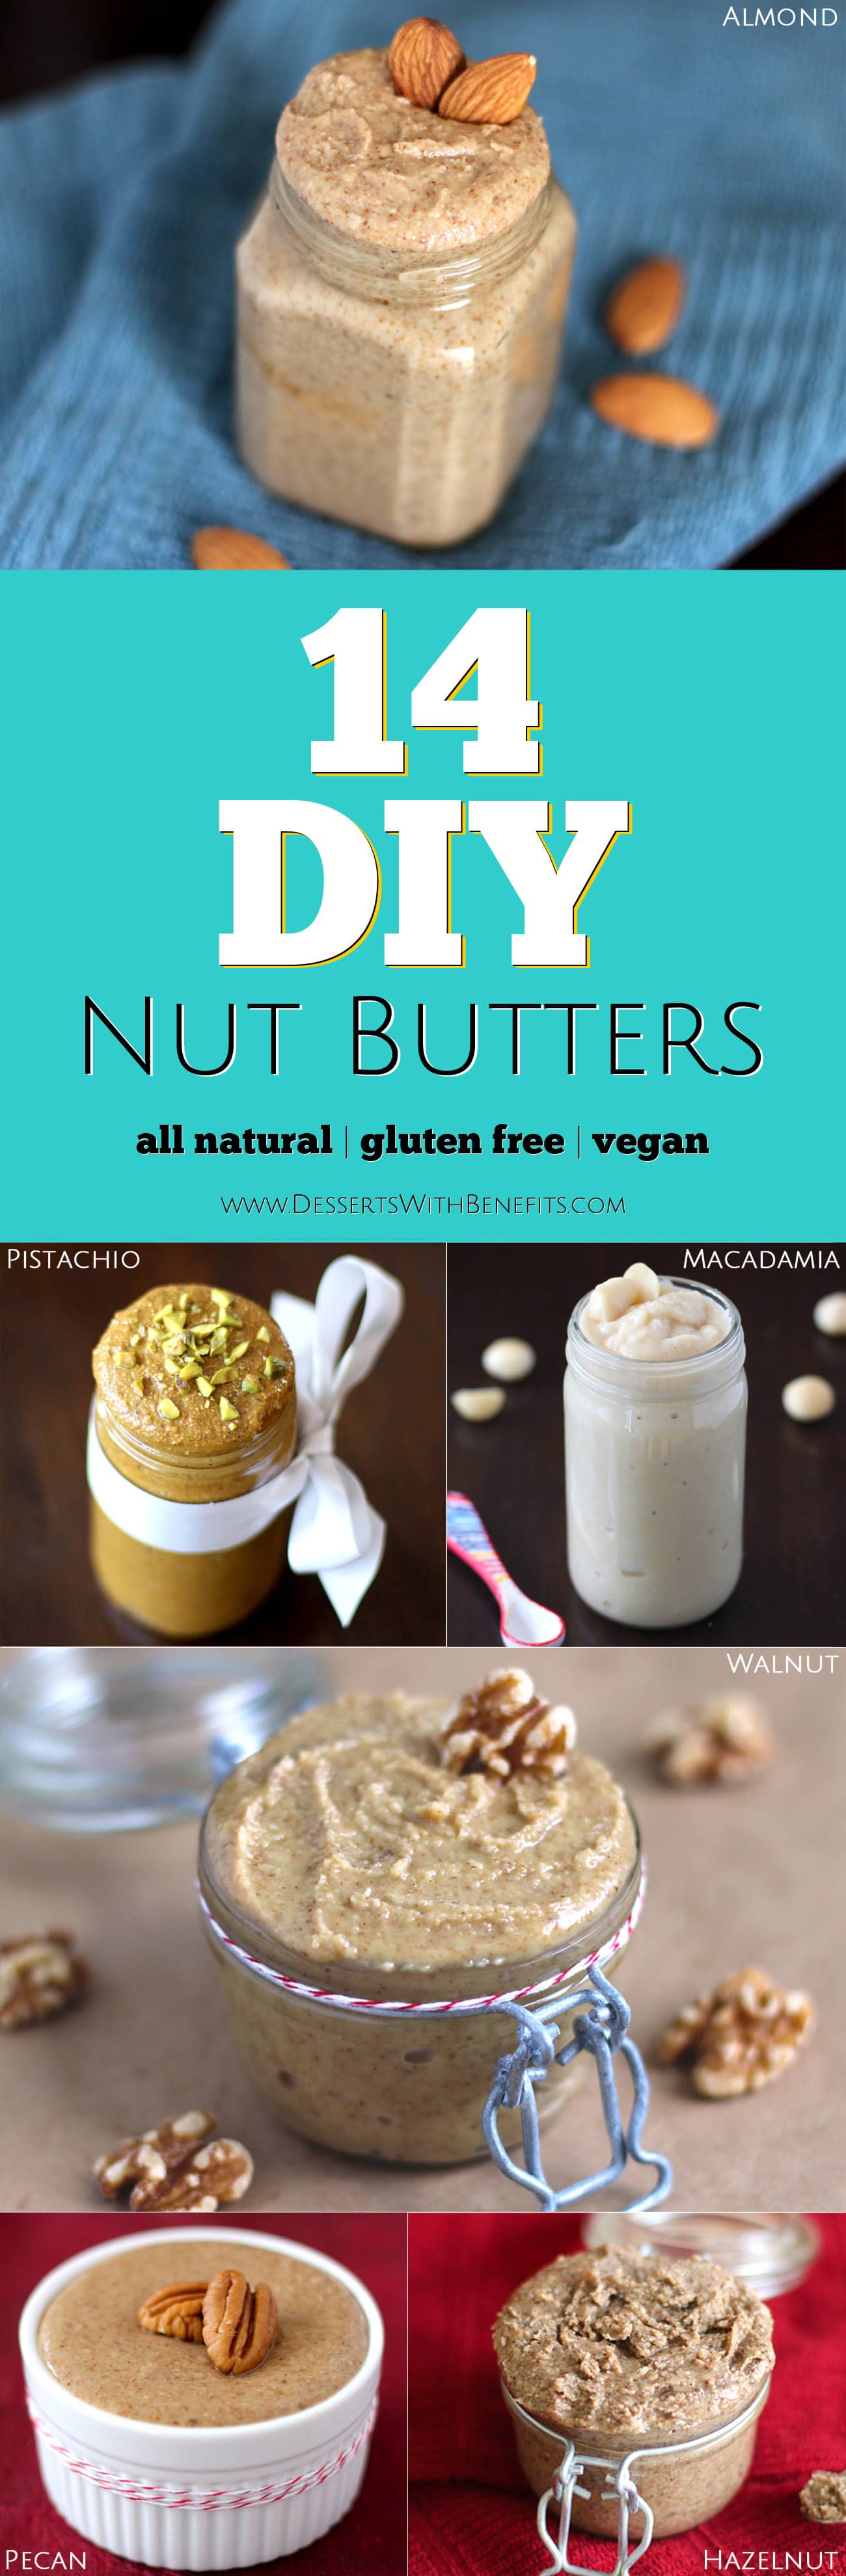 14 super SIMPLE and EASY DIY Nut Butters! Making nut butters at home is not only fun and delicious, but it saves you money too at just a fraction of the cost of storebought nut butters -- Healthy DIY Recipes at Desserts with Benefits